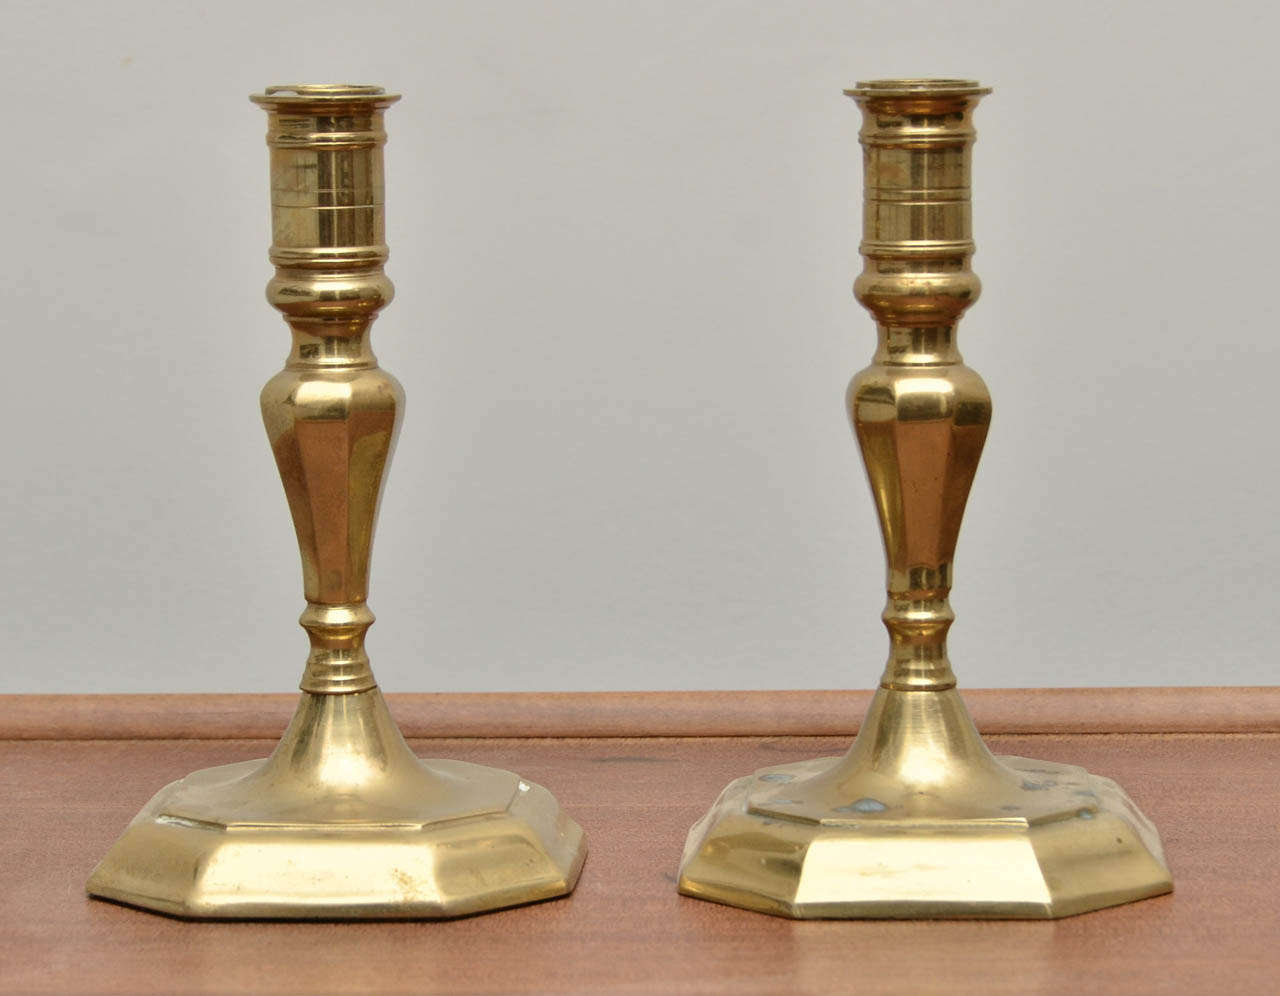 Pair of early 20th Century Brass Candlesticks - one has some spots of patina on it.